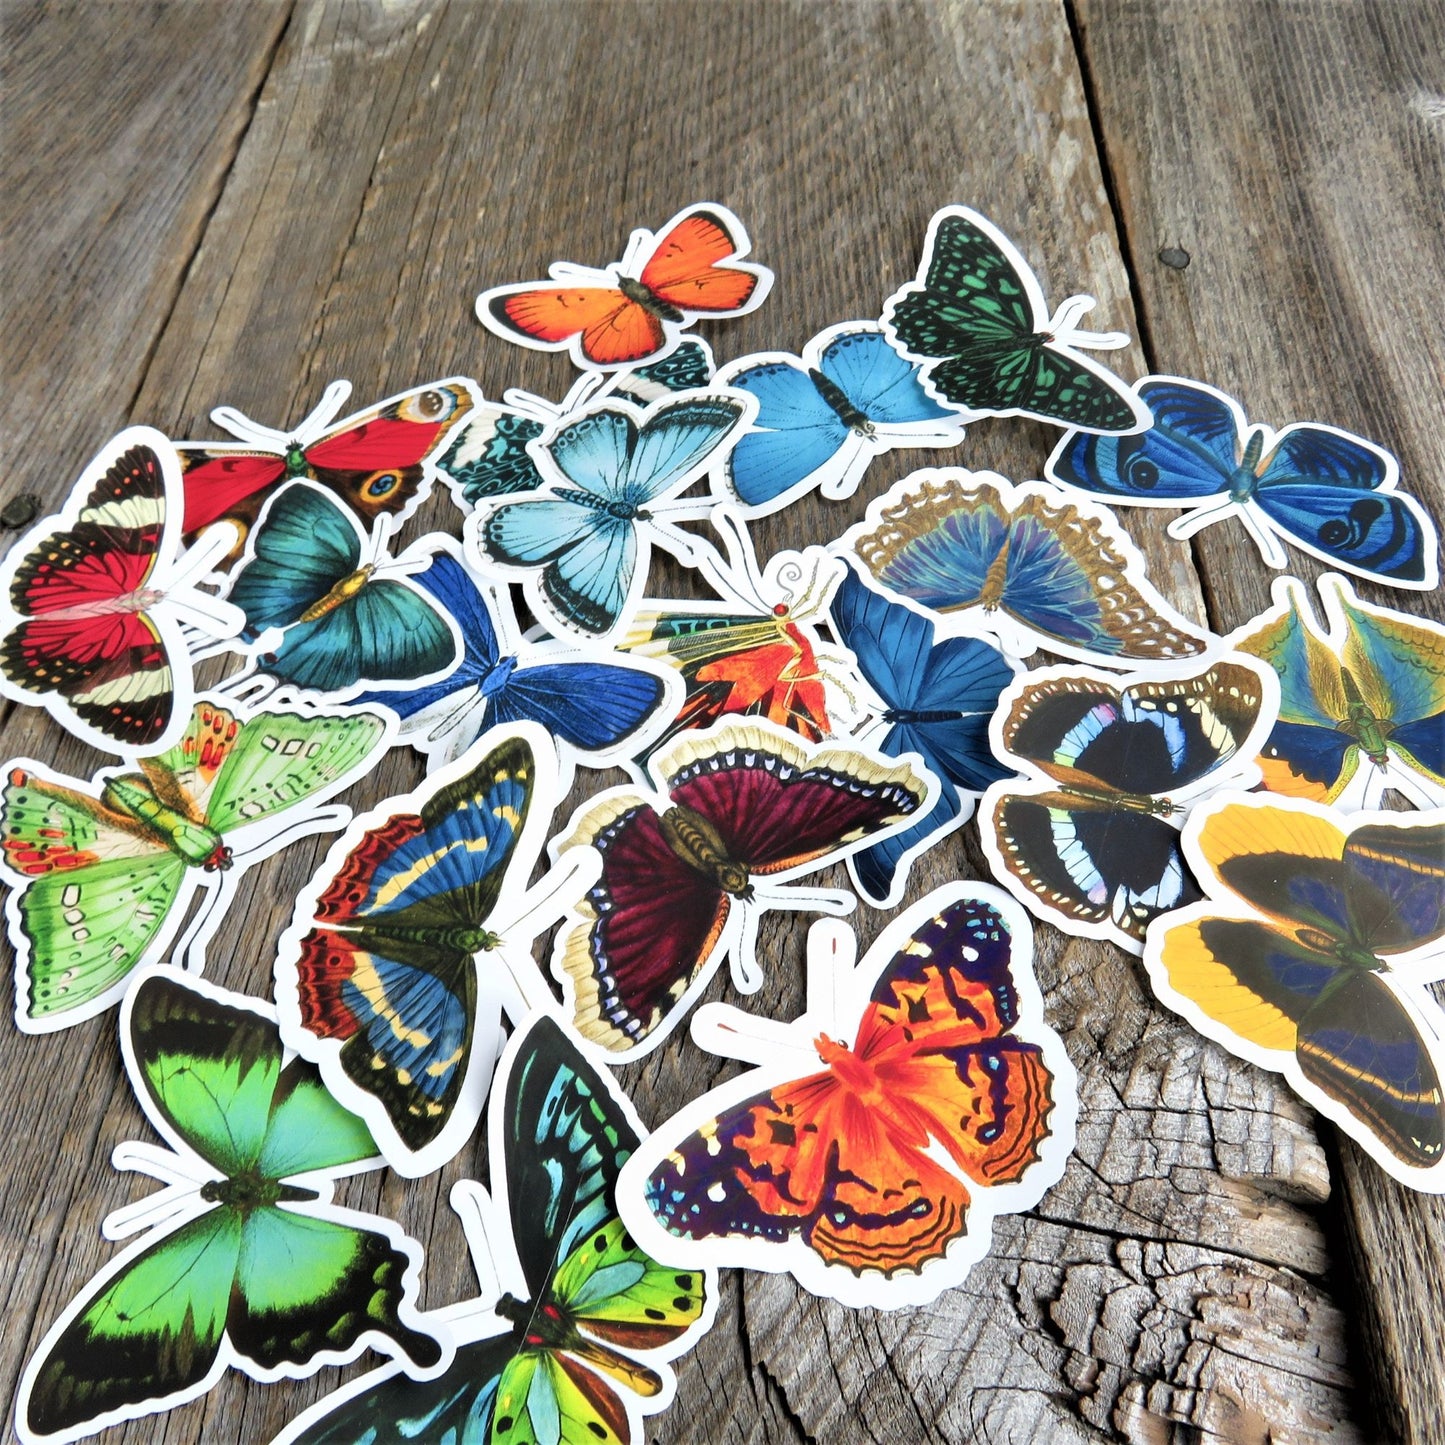 Butterfly and Moth Sticker Lot Large Vintage Style Set of 22 Multicolored Junk Journal Scrapbook Multimedia Mixed Art